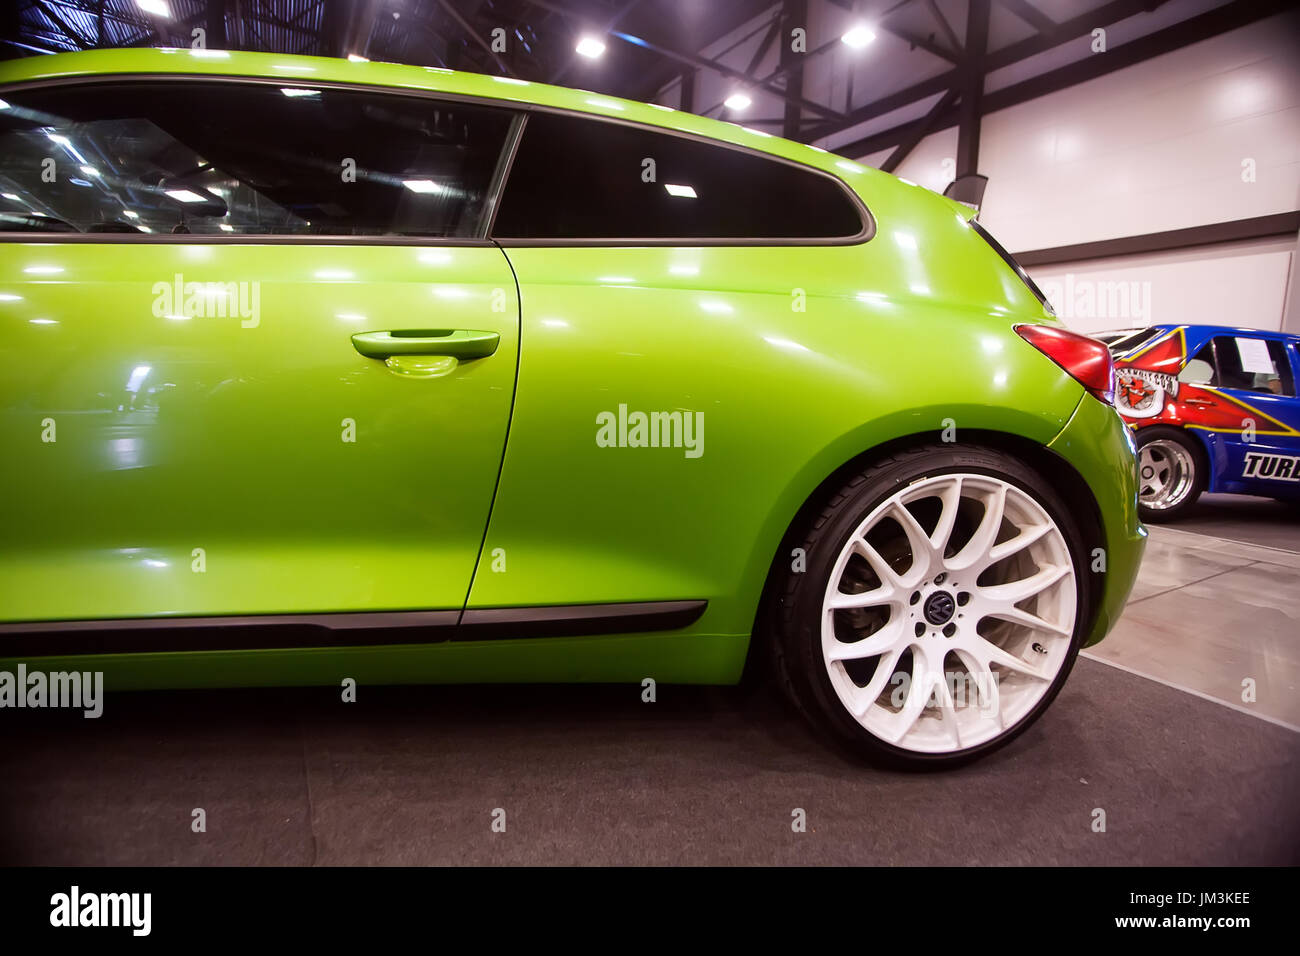 SAINT-PETERSBURG, RUSSIA - JULE 23, 2017: Front view of green car Wolkswagen with sport tuning on Royal Auto Show. Close up of Car side and white whee Stock Photo